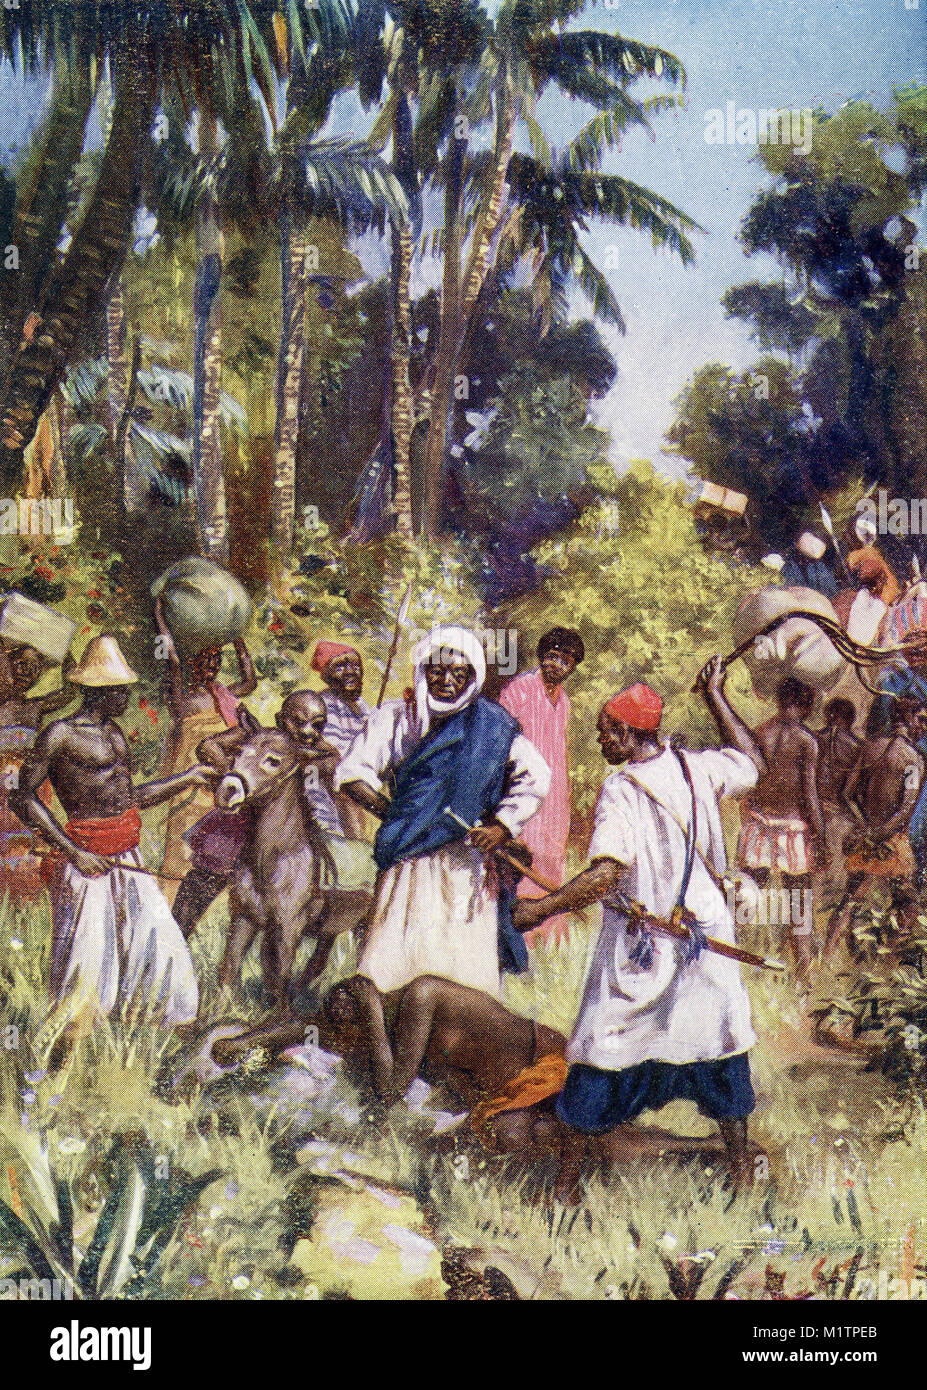 Halftone illustration of Arab slave traders at work in Africa, circa 1700s. From an original image in How Other People Live by H. Clive Barnard, 1918. Stock Photo